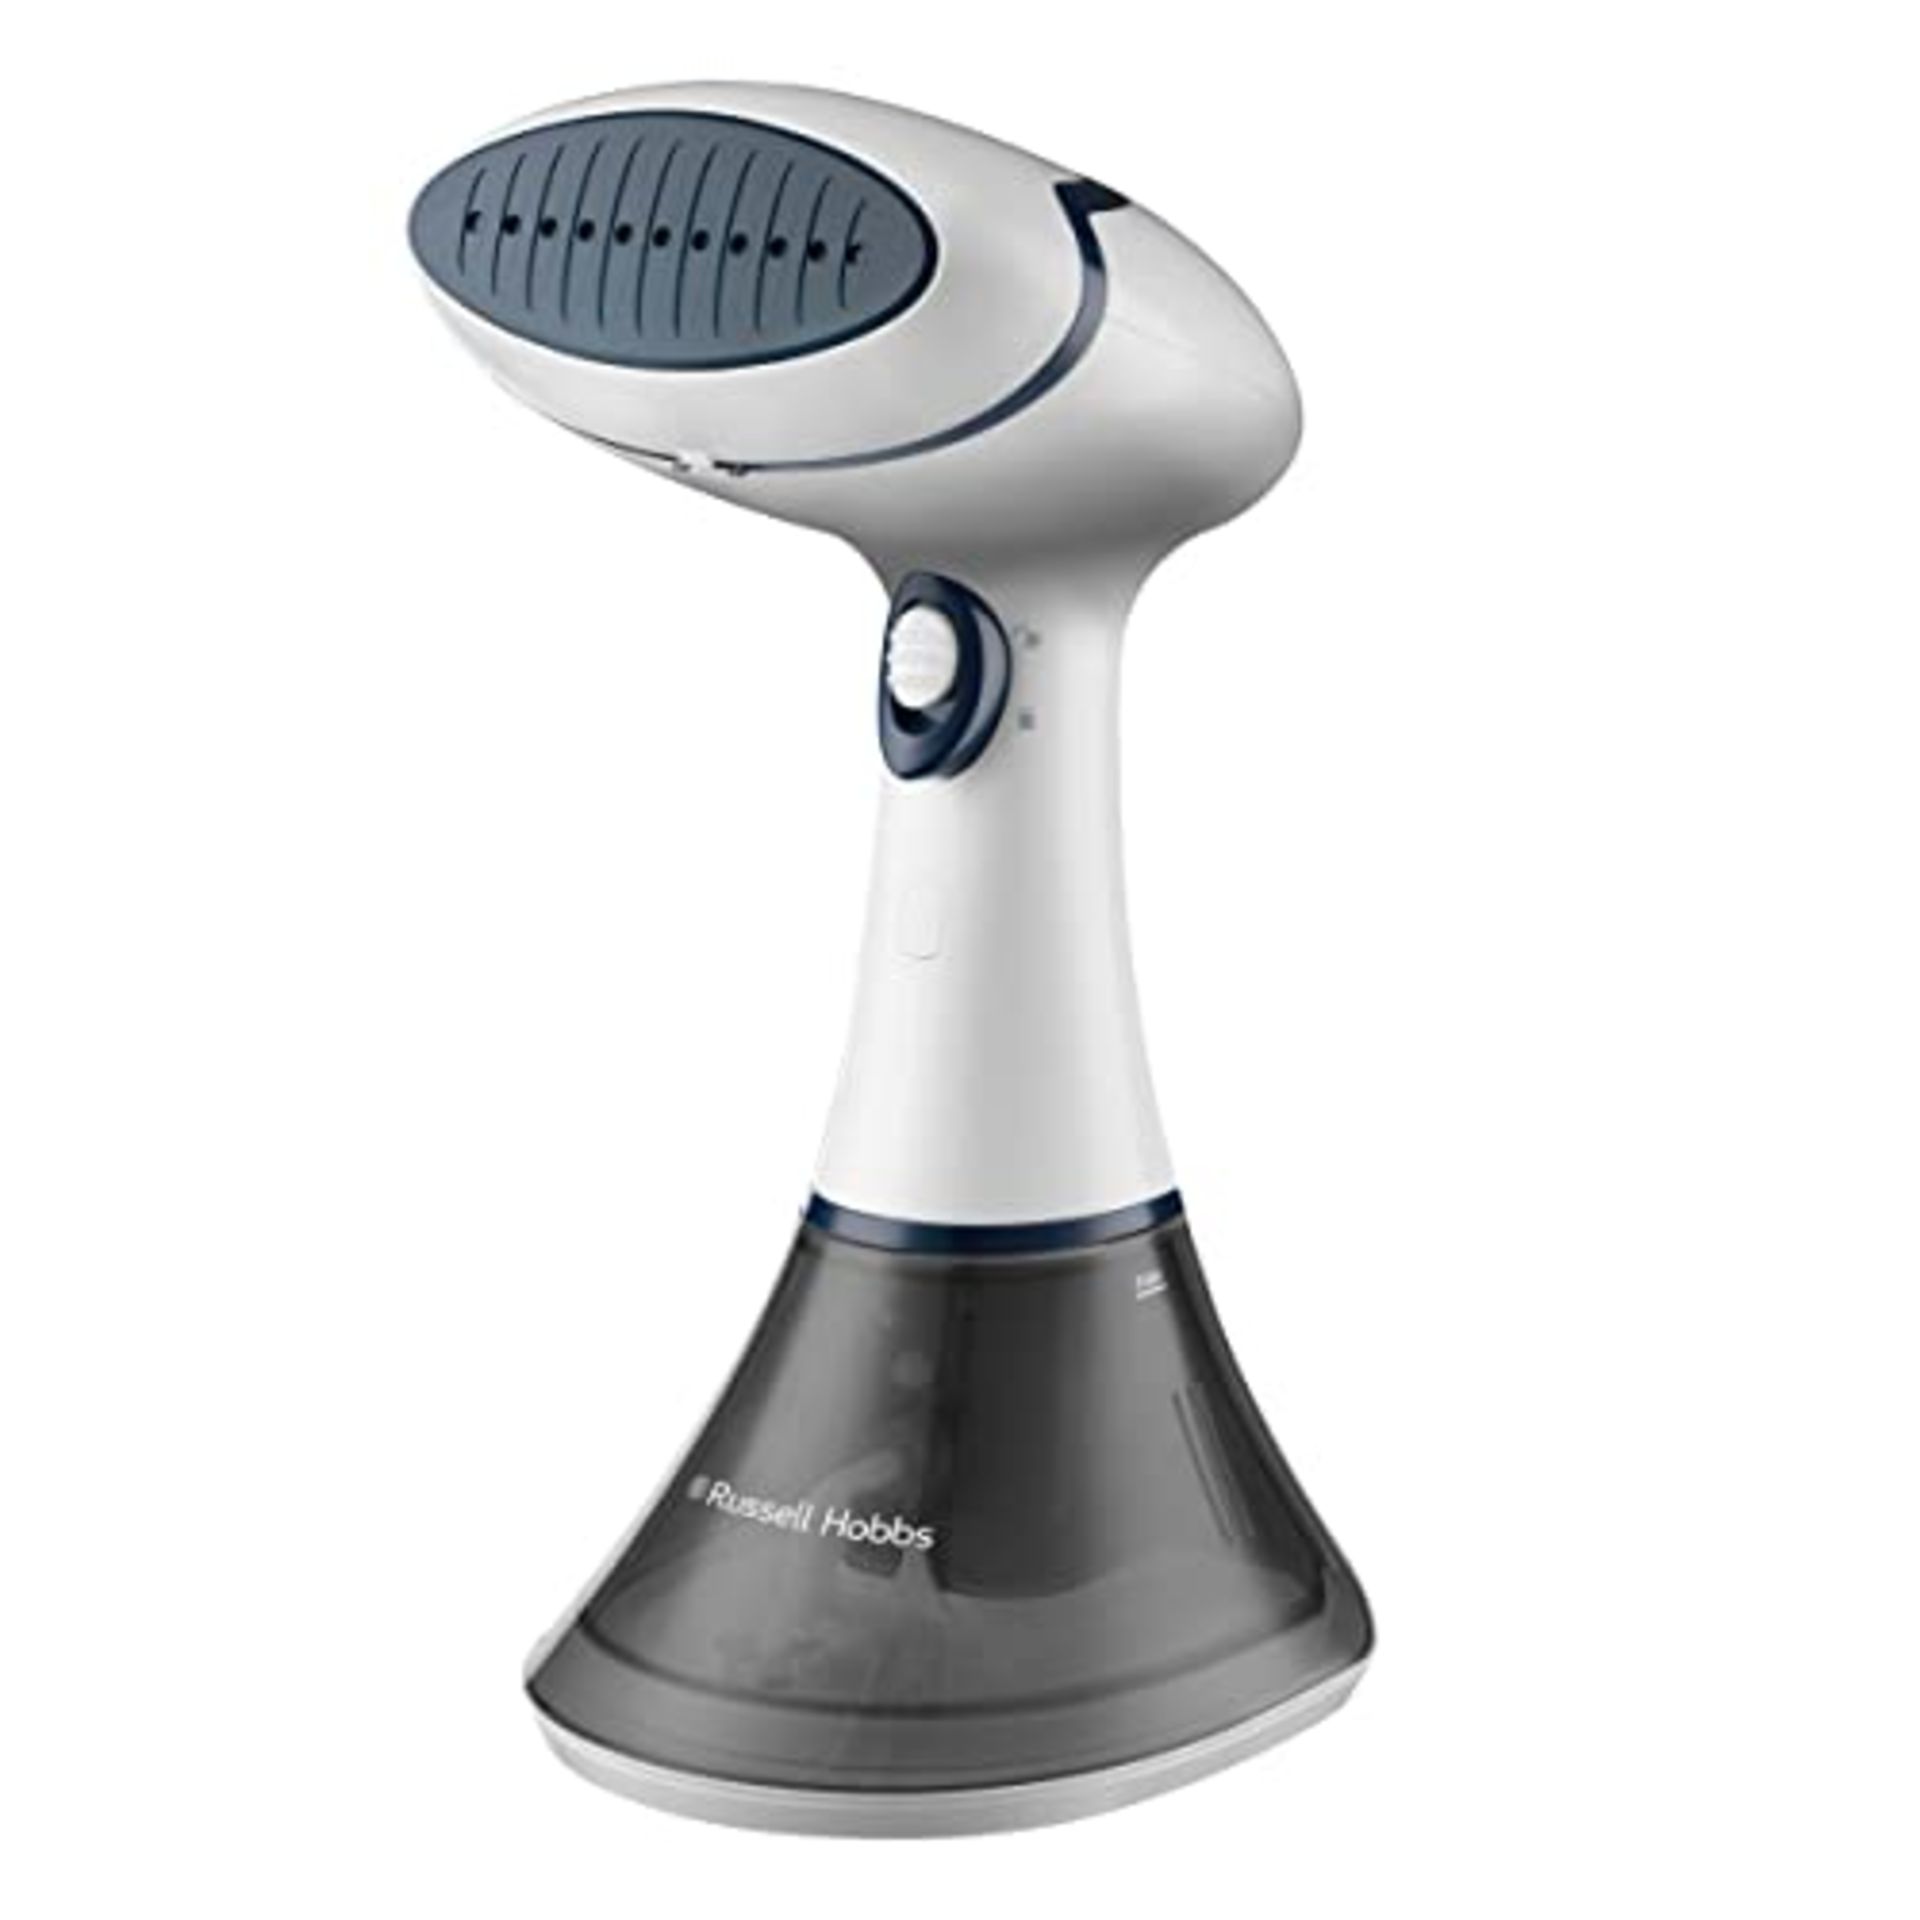 Russell Hobbs Steam Genie Handheld Clothes Steamer, No Ironing Board Needed, Ready to